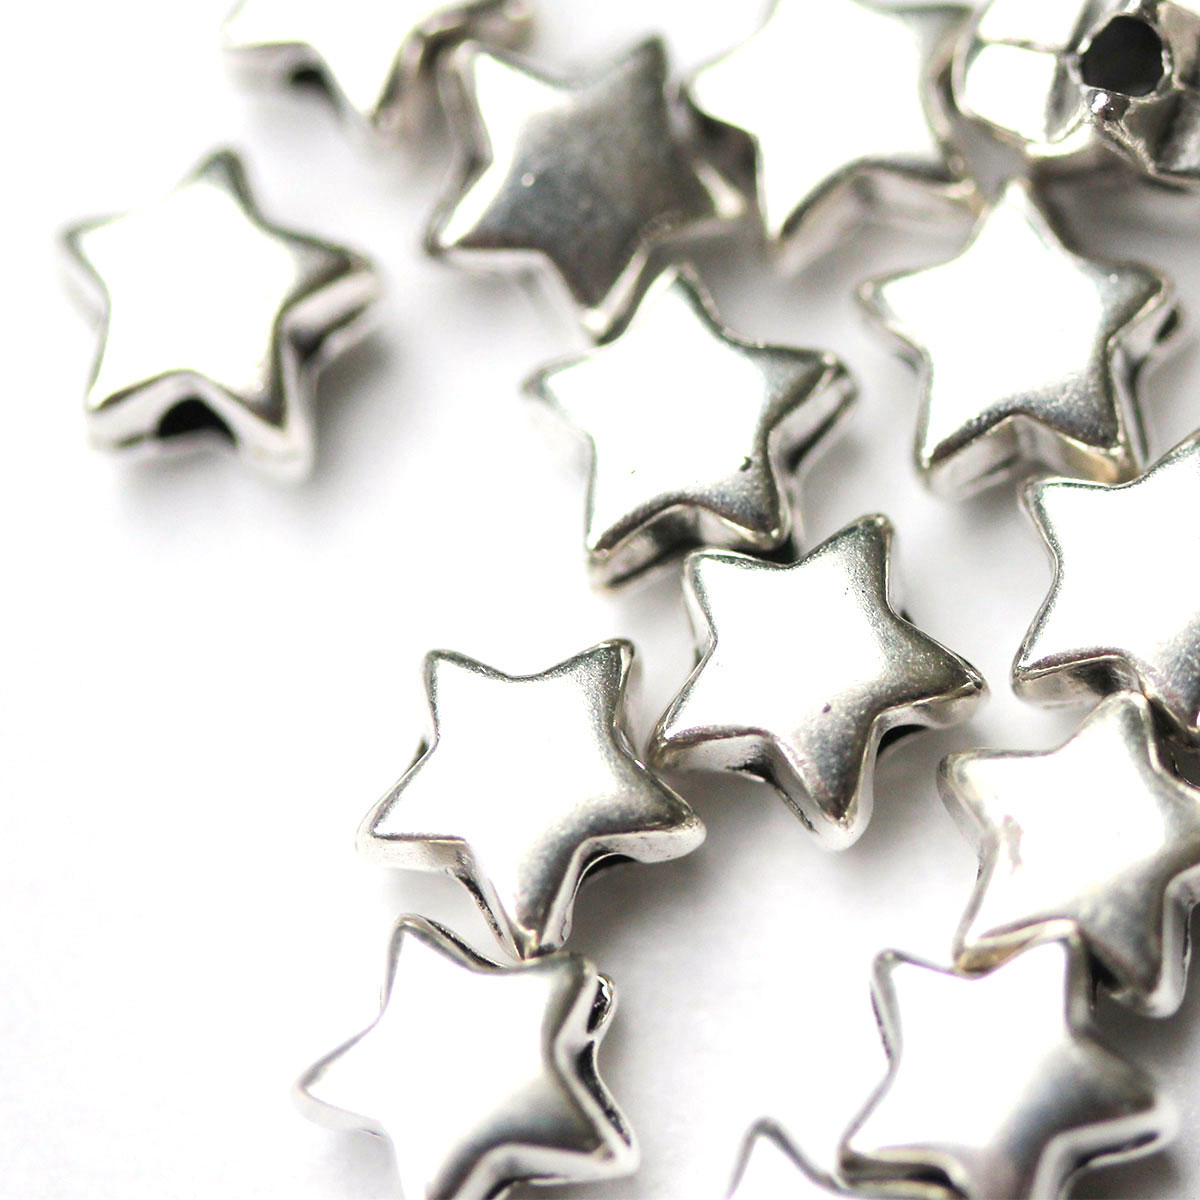 Silver Small Star Metal Beads